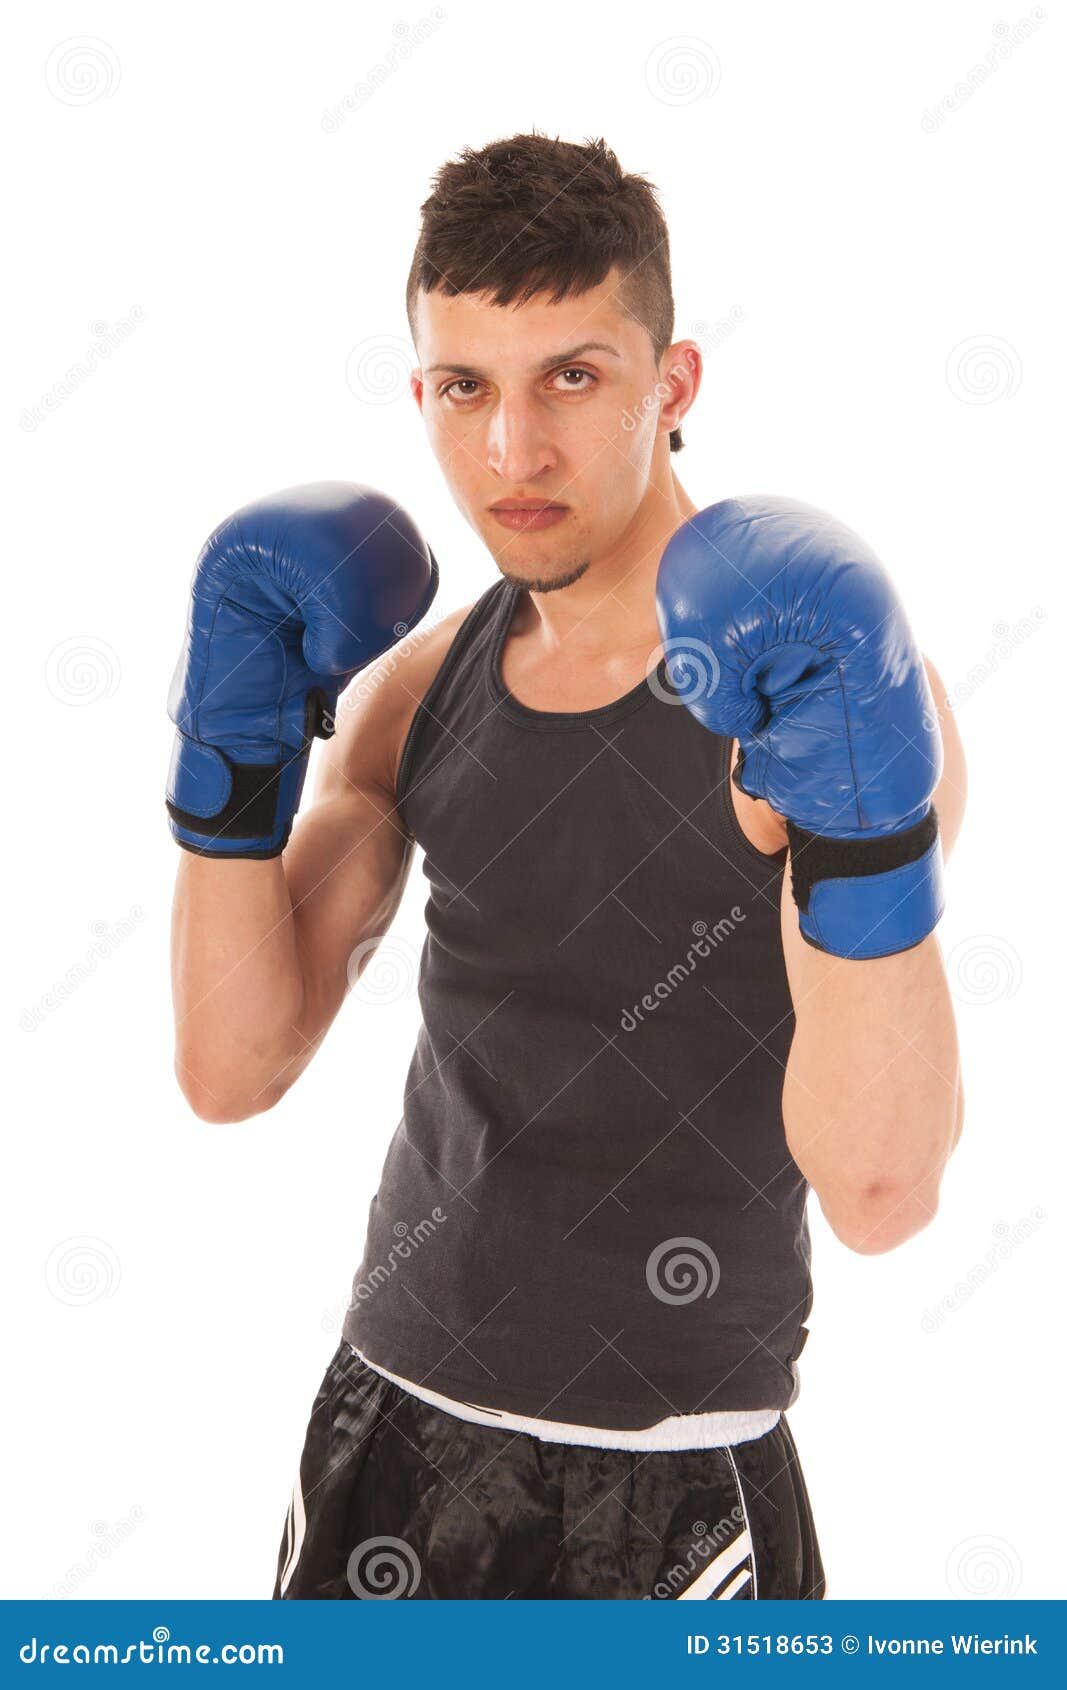 Boxing man stock image. Image of strength, fitness, muscular - 31518653